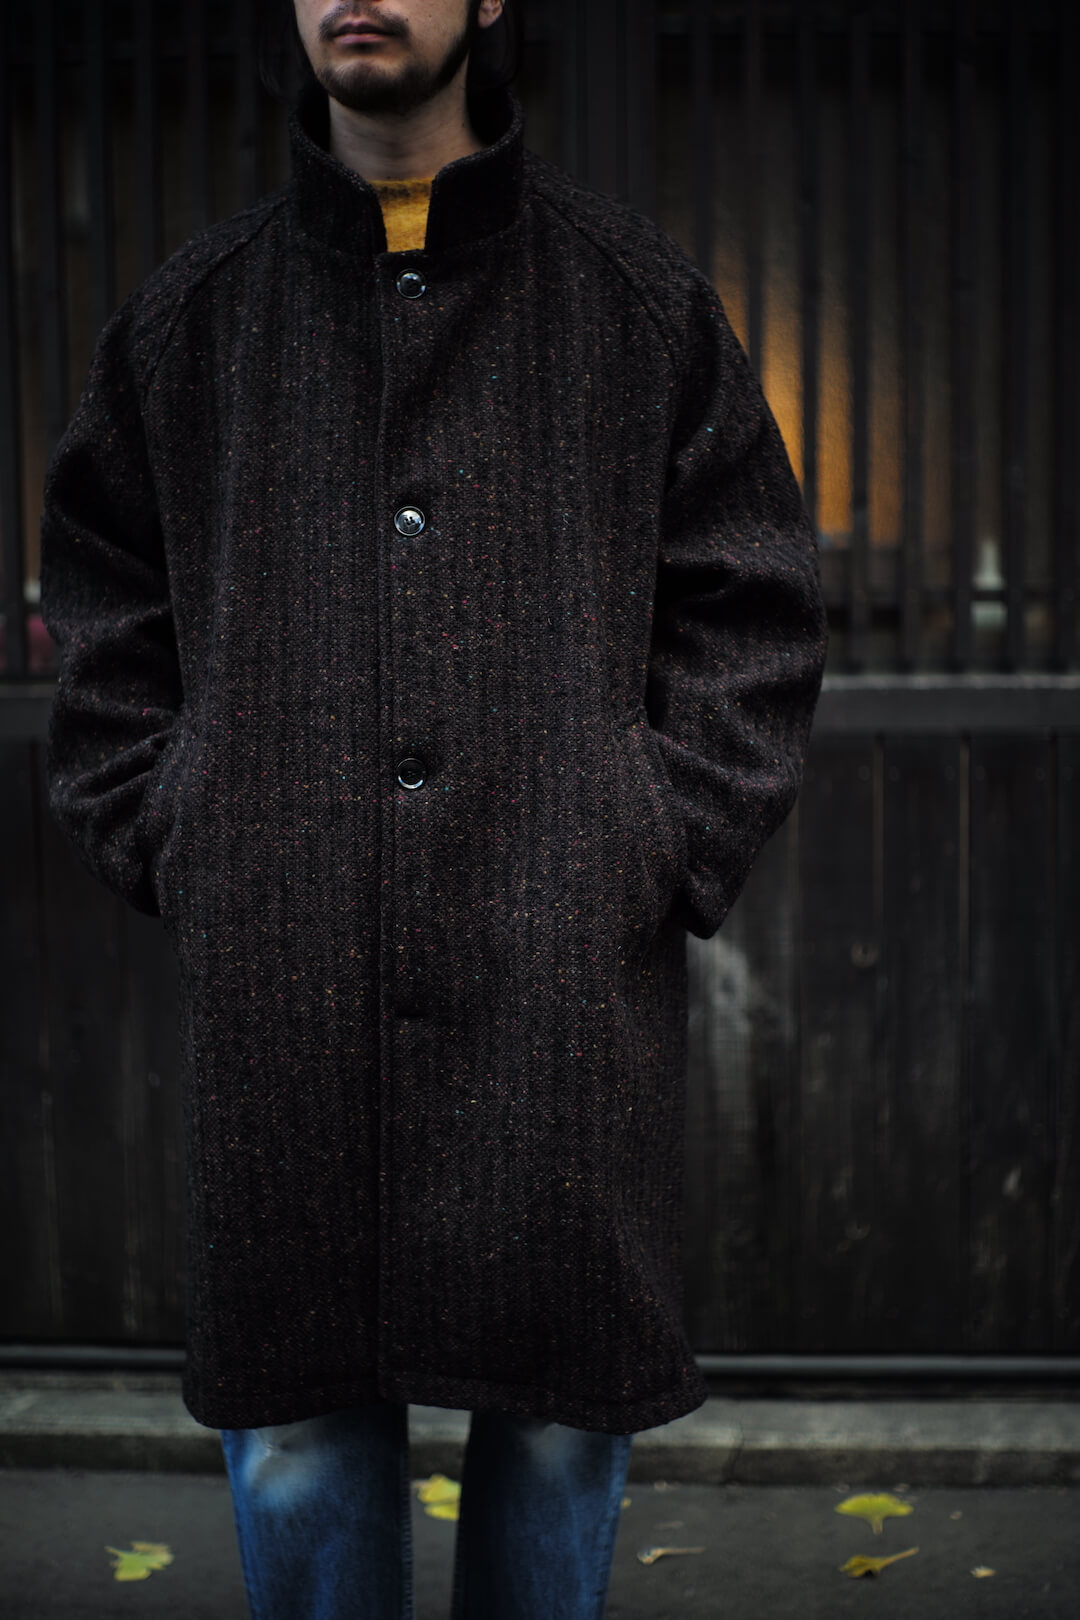 Fisherman Coat “Donegal Tweed” - Arch / Arch Sapporo - ARCH ONLINE 